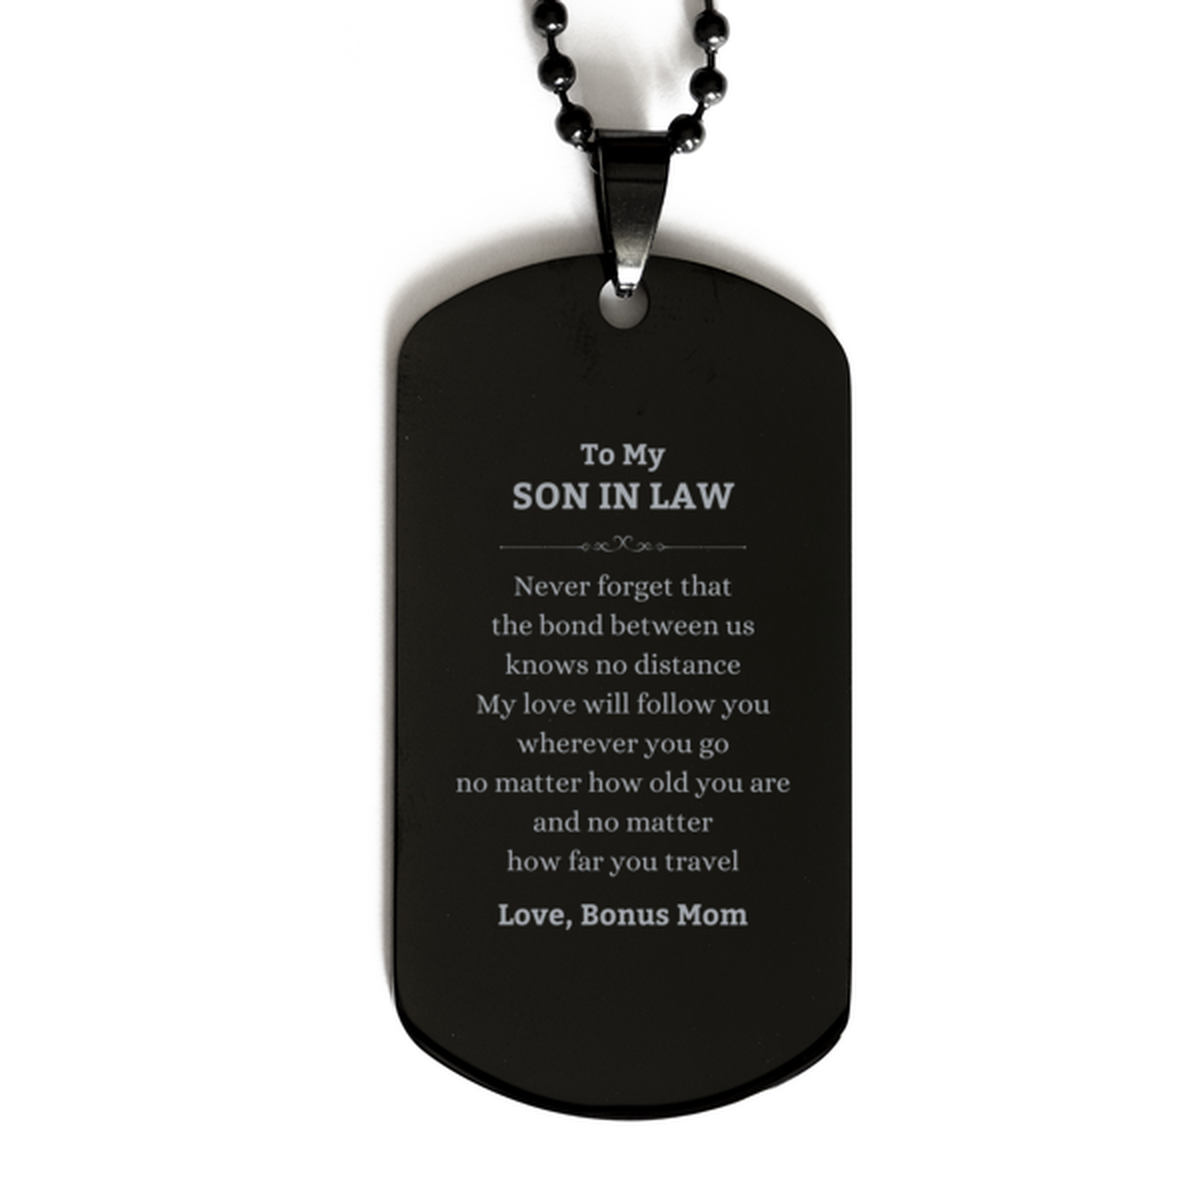 Son In Law Birthday Gifts from Bonus Mom, Adjustable Black Dog Tag for Son In Law Christmas Graduation Unique Gifts Son In Law Never forget that the bond between us knows no distance. Love, Bonus Mom